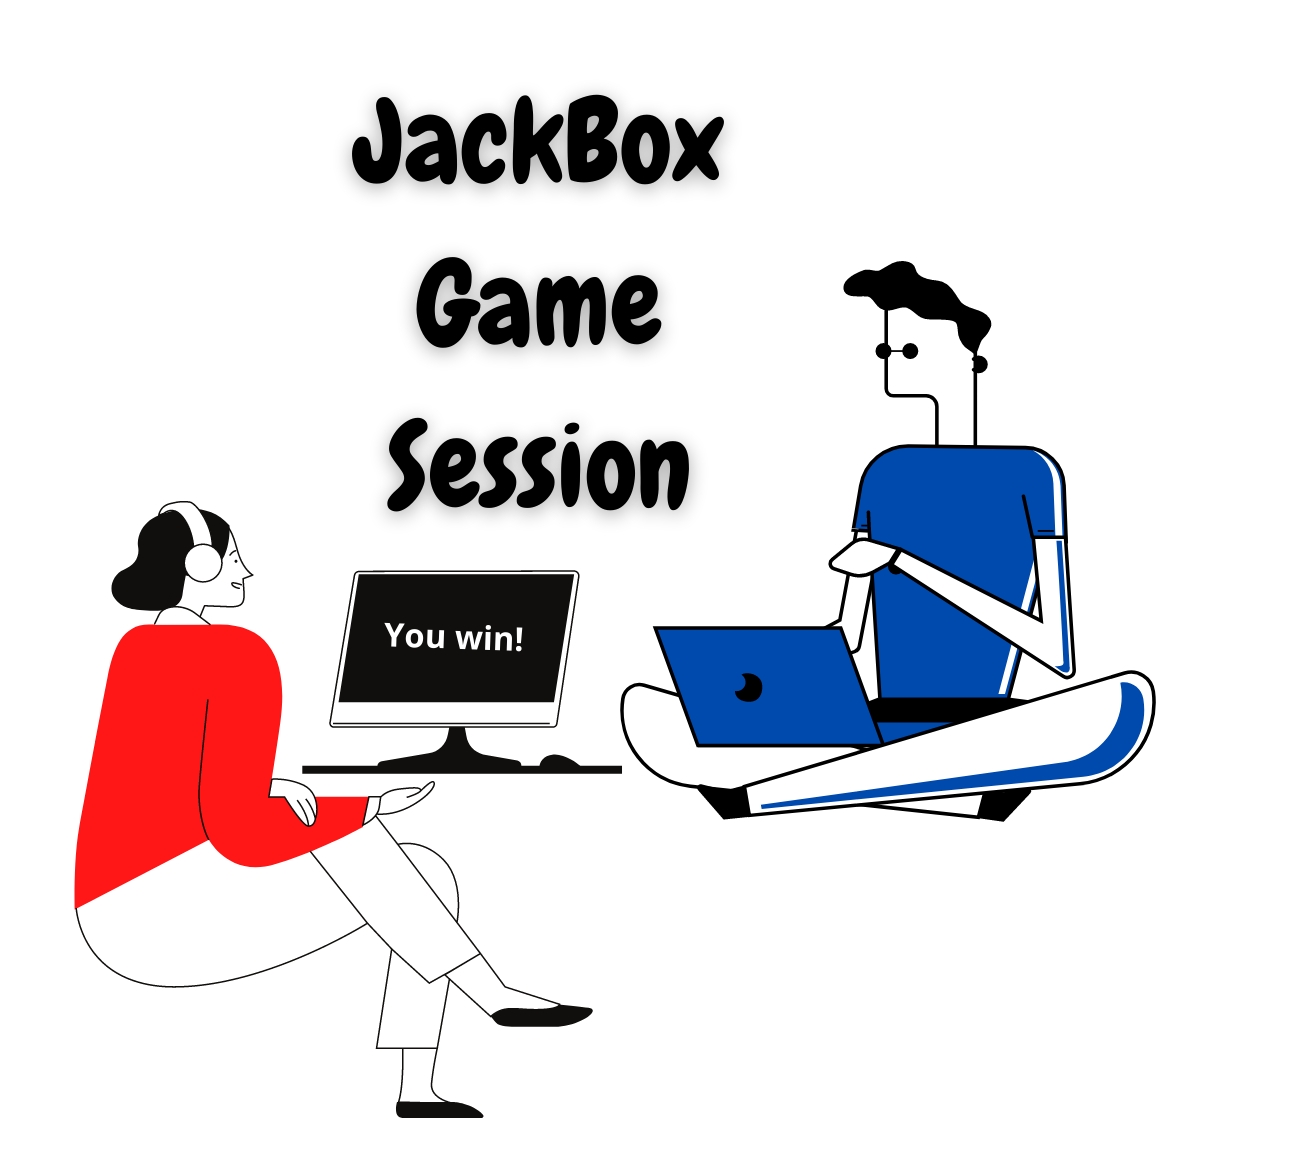 A woman in a red shirt and a man in a blue shirt sit with their computers playing games. 